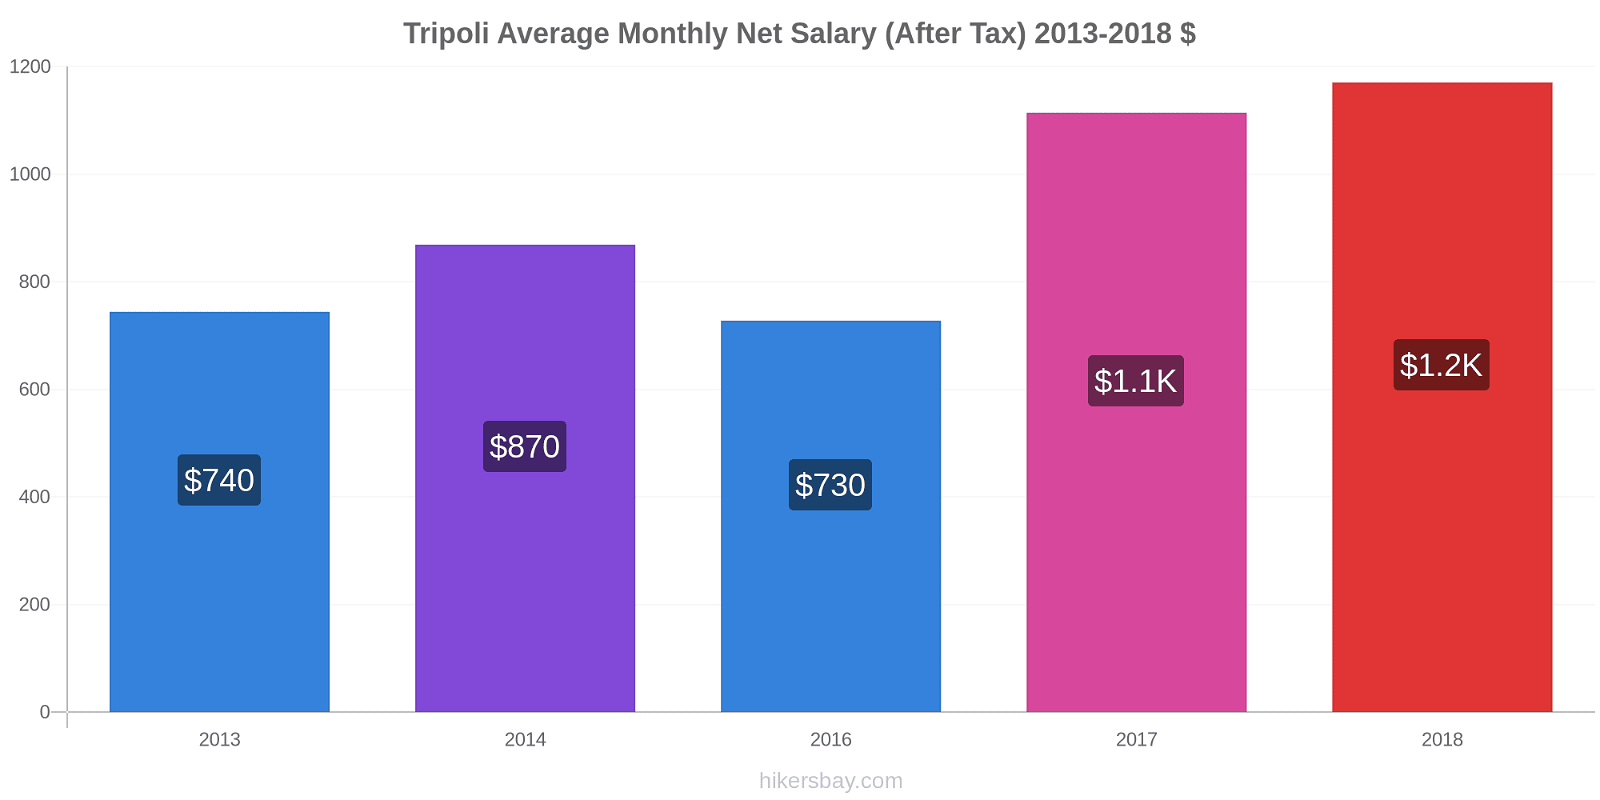 Tripoli price changes Average Monthly Net Salary (After Tax) hikersbay.com